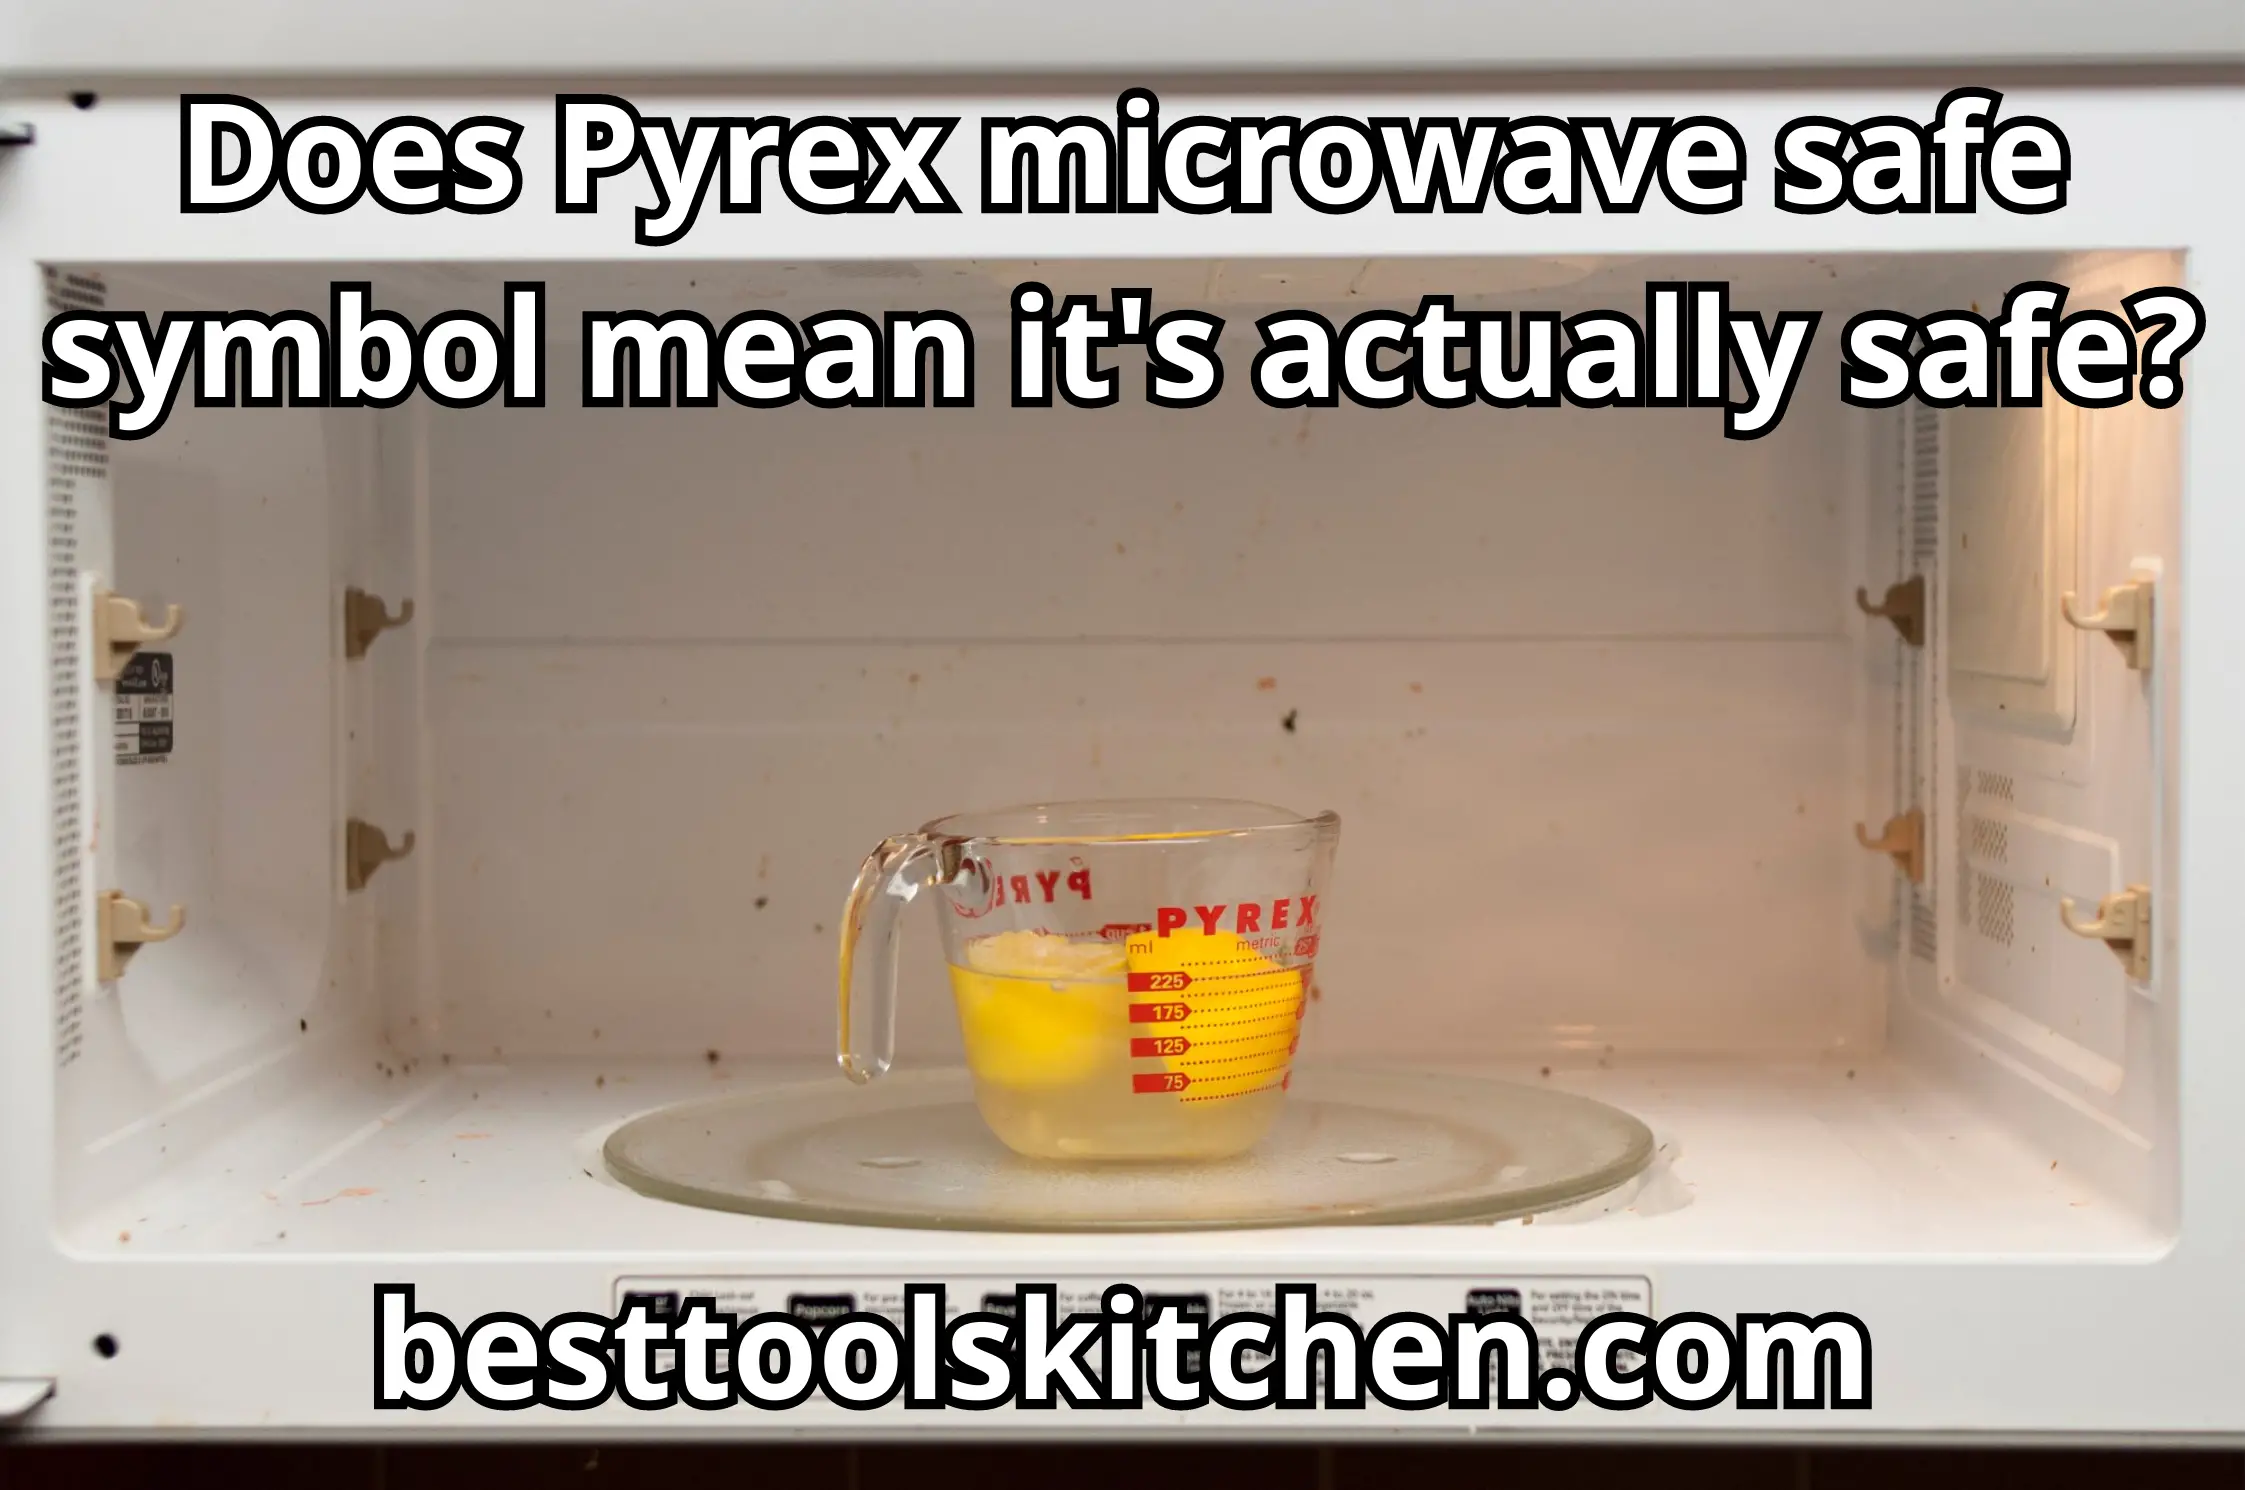 Does Pyrex microwave safe symbol mean it's actually safe